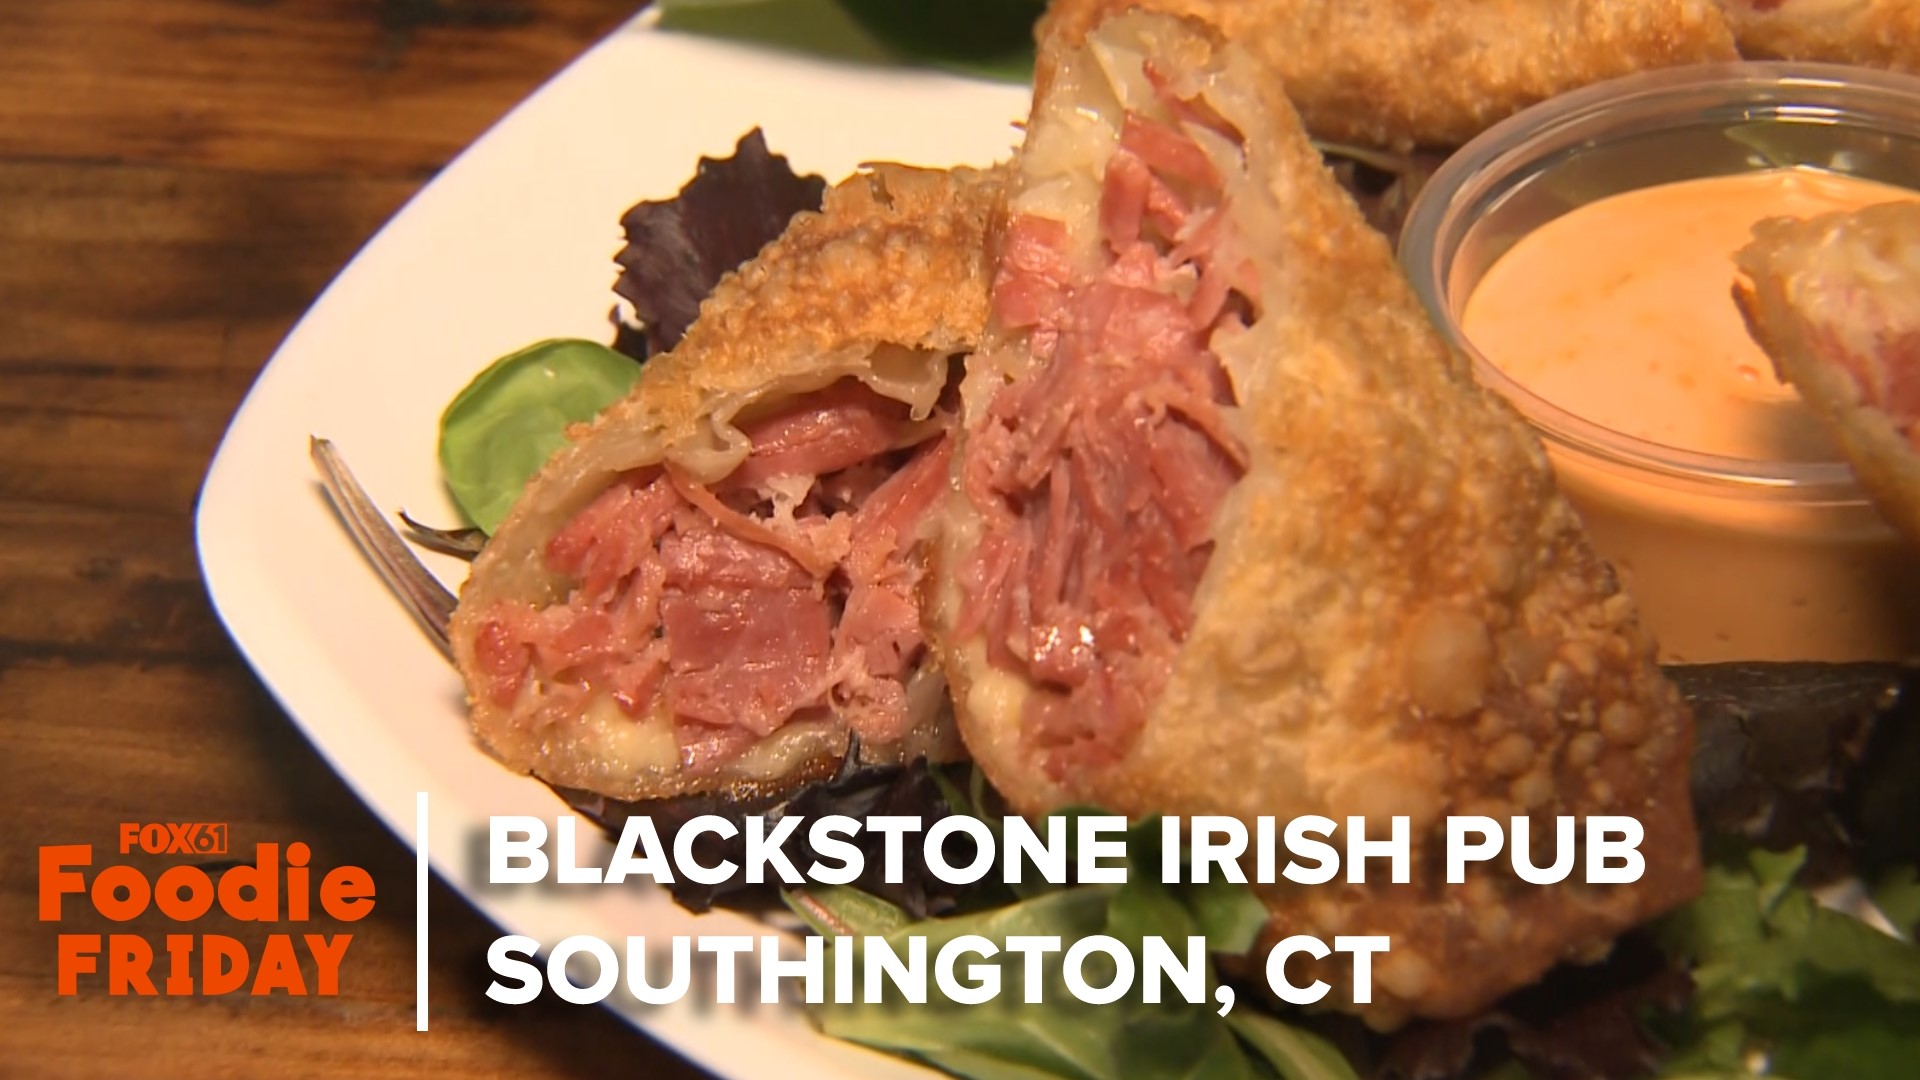 FOX61's Rachel Piscitelli visits Blackstone Irish Pub in Southington for authentic eats on this St. Patrick's Day edition of Foodie Friday.